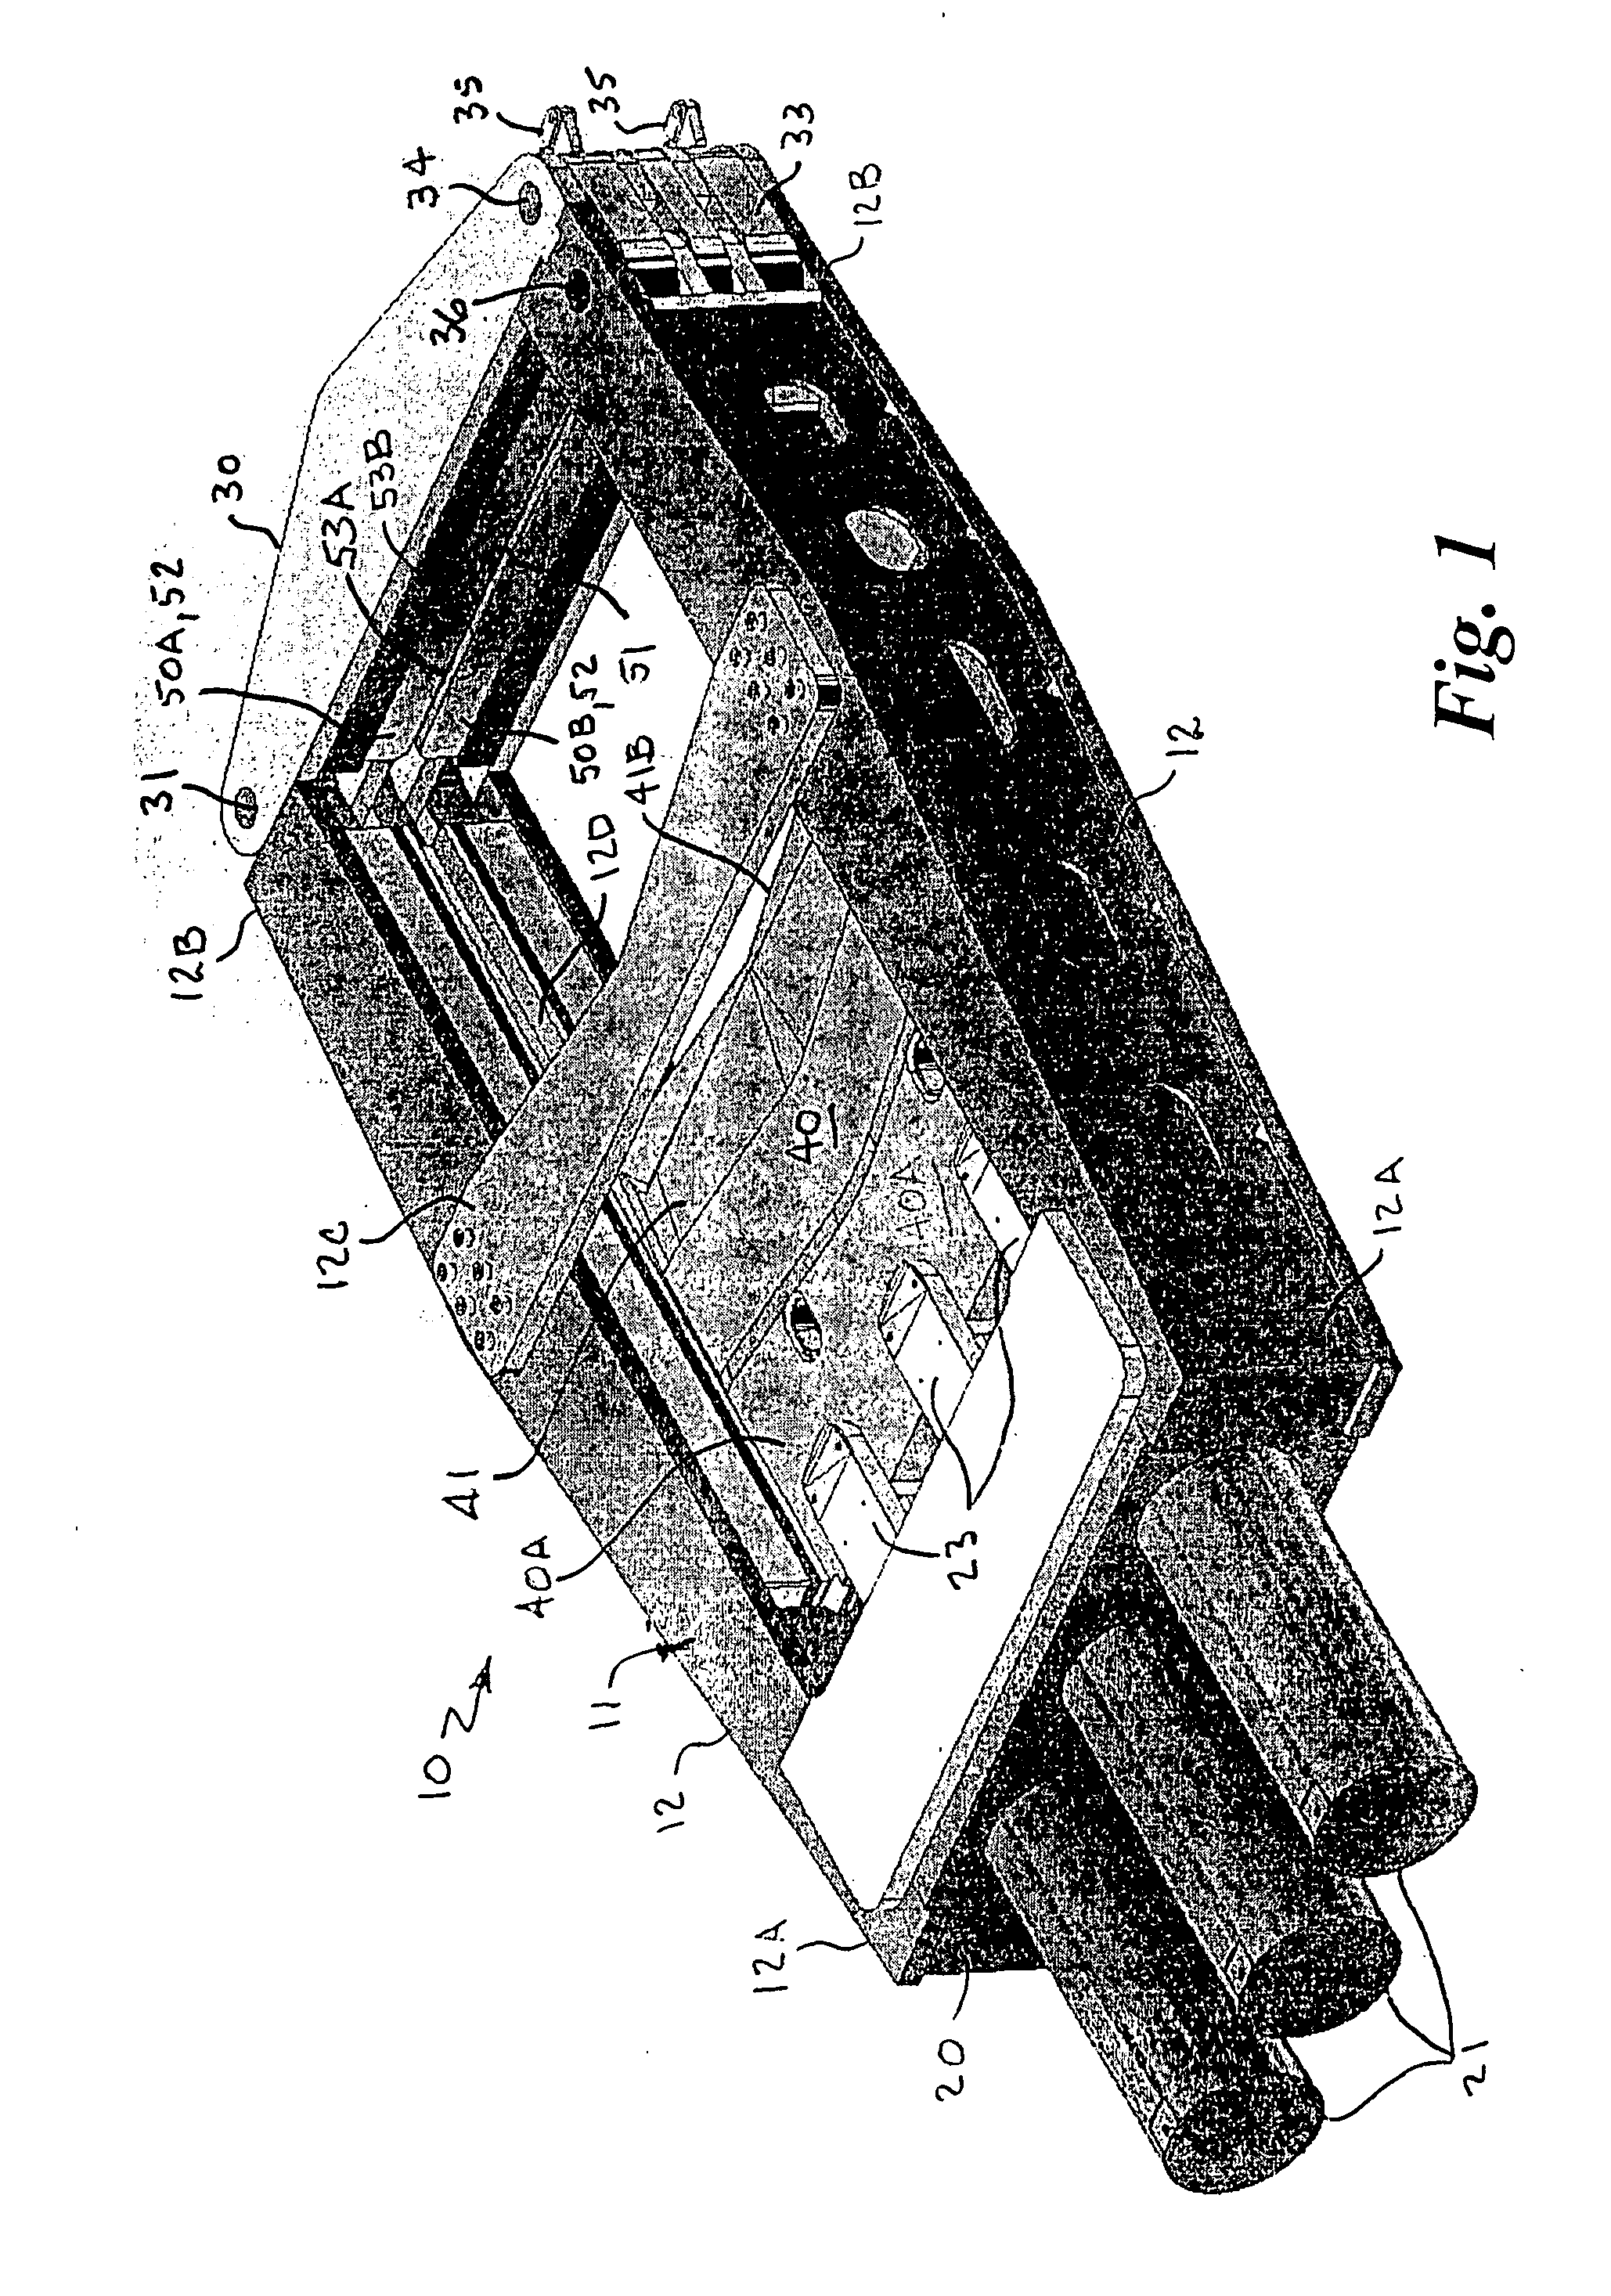 Apparatus and method for shearing reinforced concrete piles and metal piles and crushing reinforced concrete piles